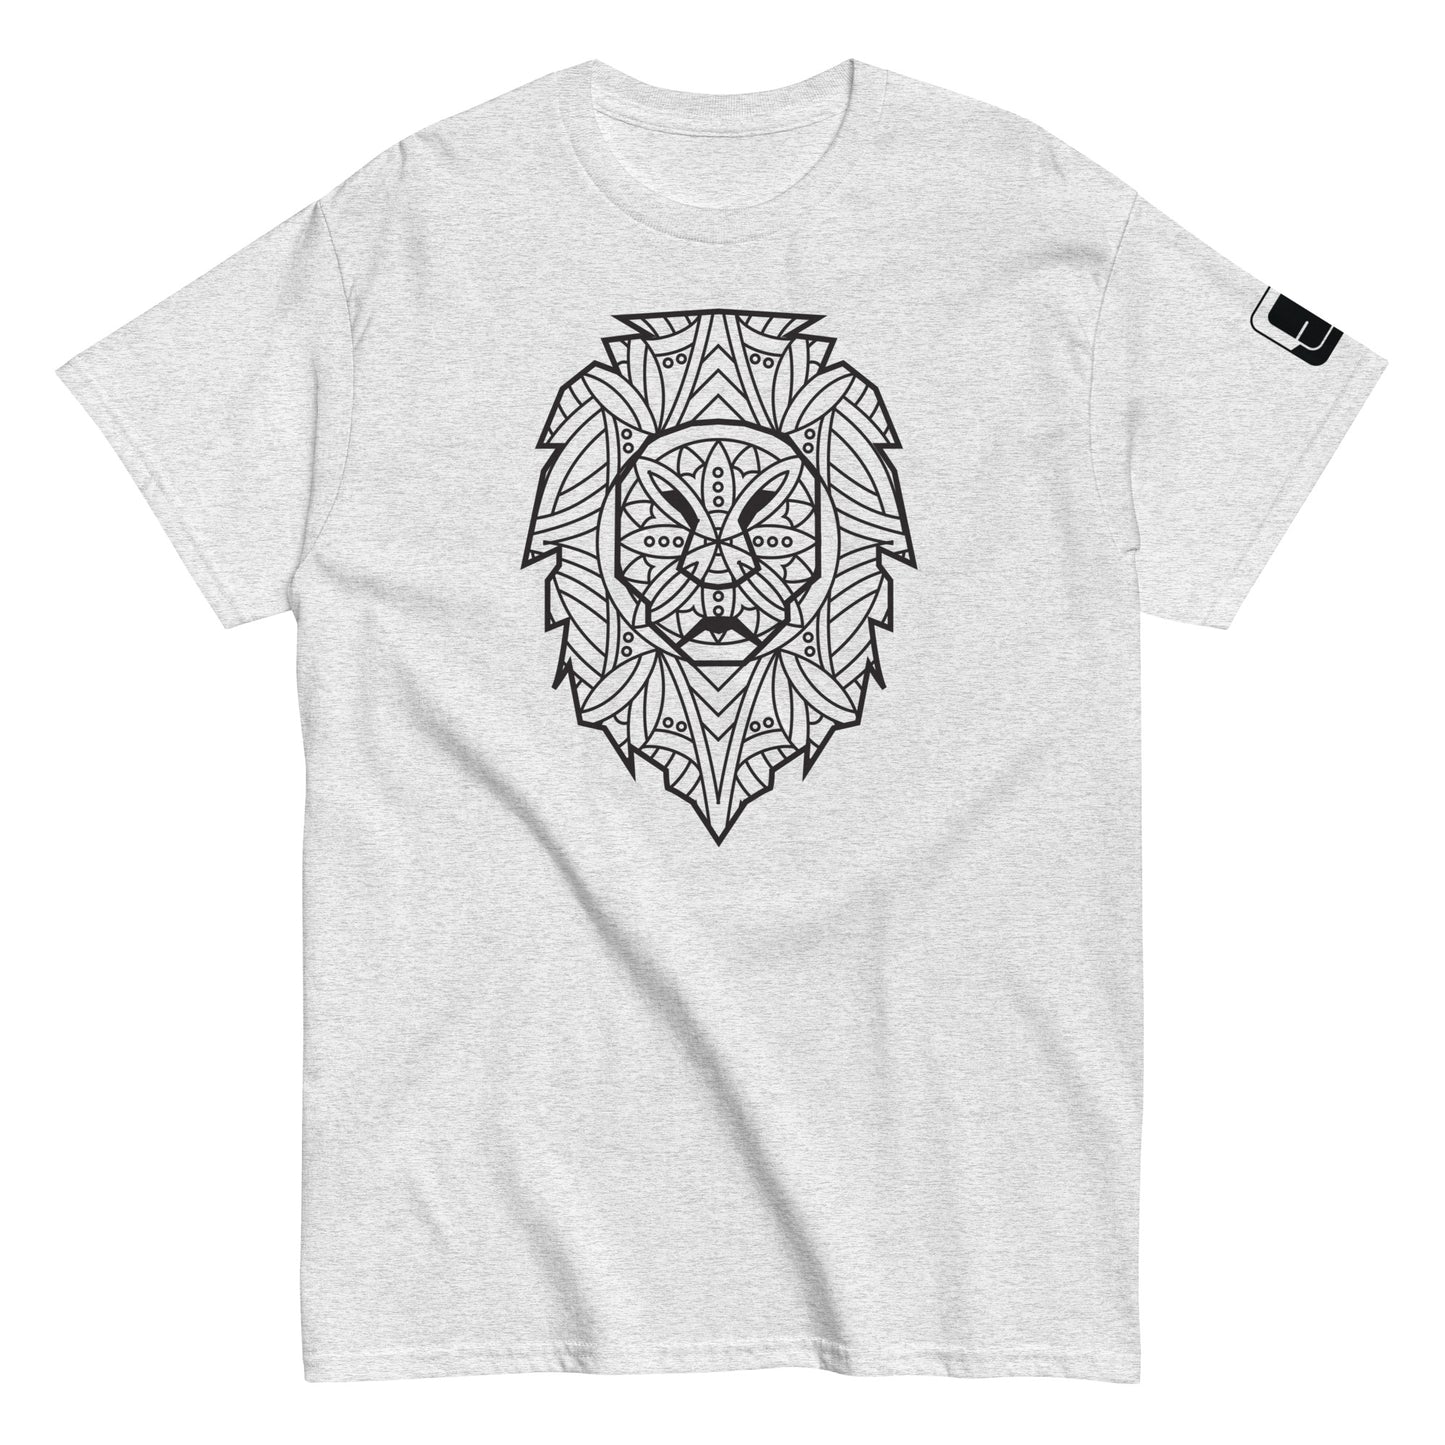 Heather Ash Colored t-shirt with a large black geometric lion head design on the chest and a small square logo patch on the sleeve, against a white background.